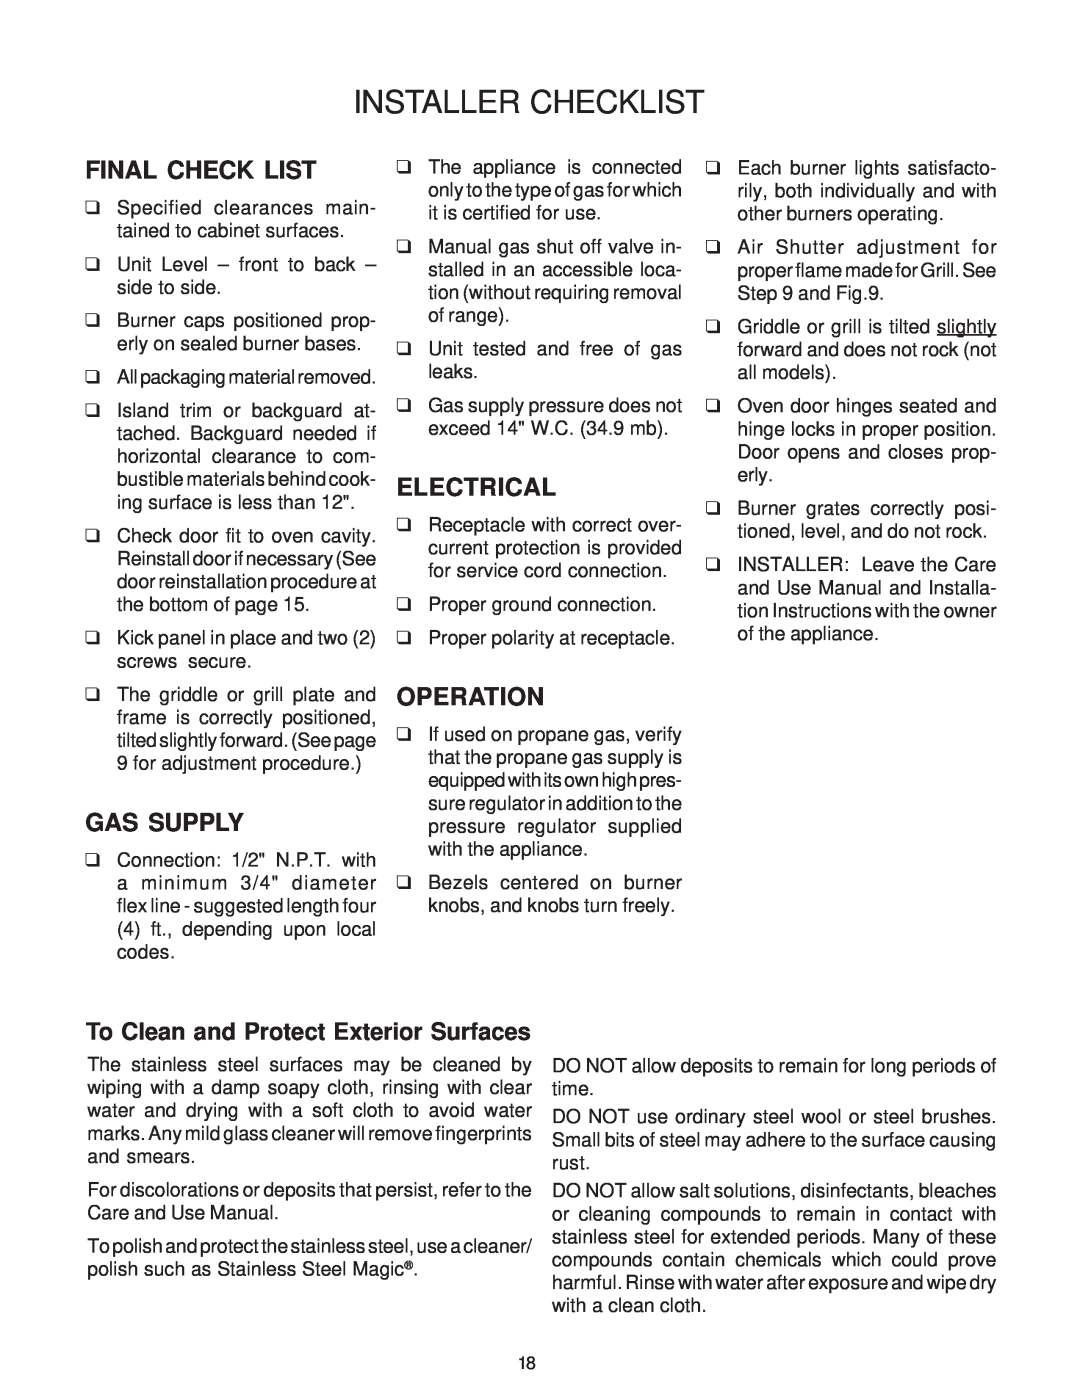 Thermador P30 installation instructions Installer Checklist, Final Check List, Gas Supply, Electrical, Operation 